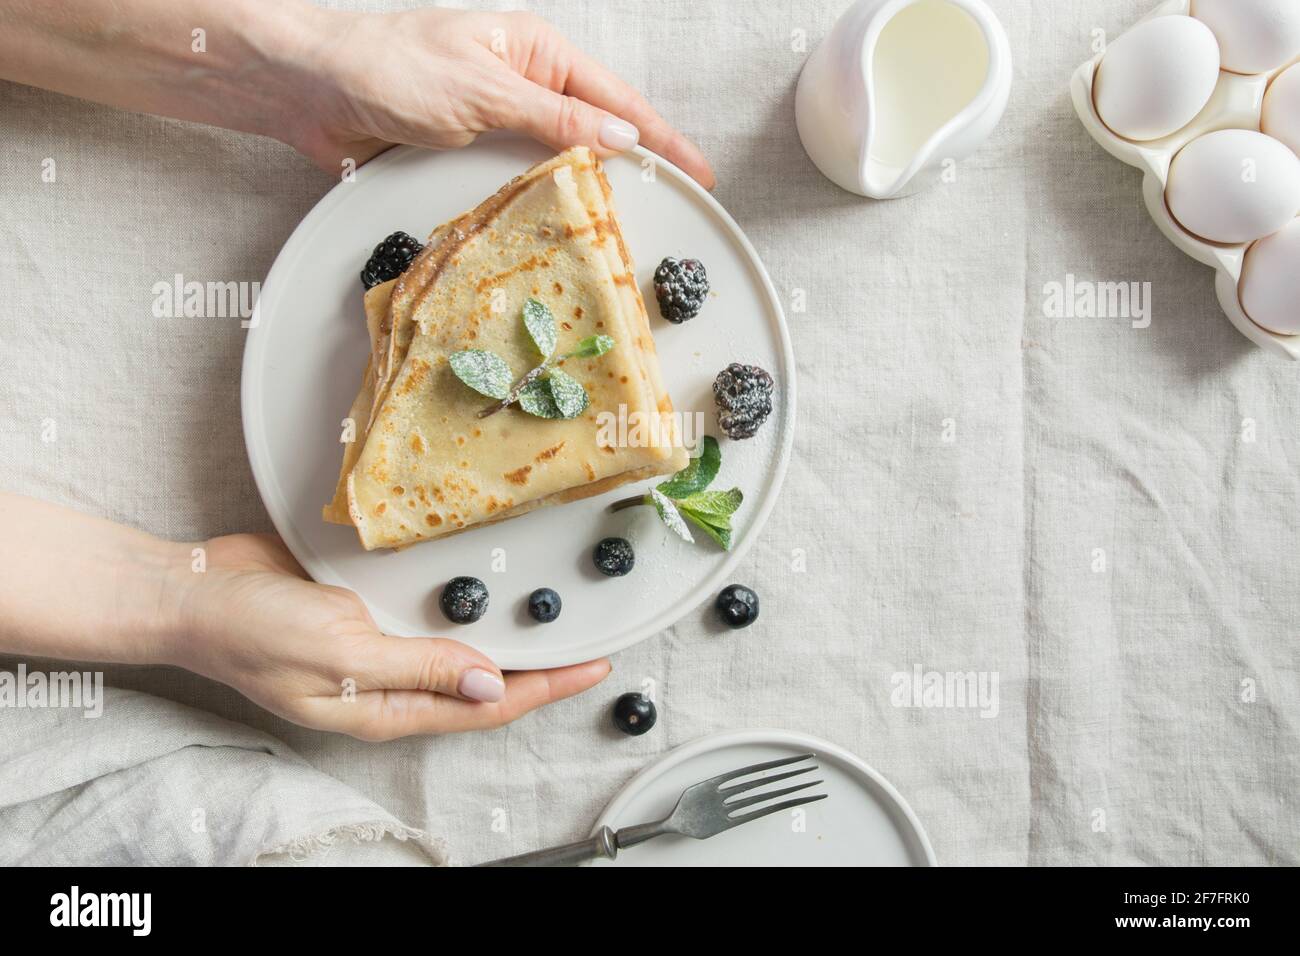 Woman served breakfast of tasty Russian pancakes or blini. View from above. Stock Photo